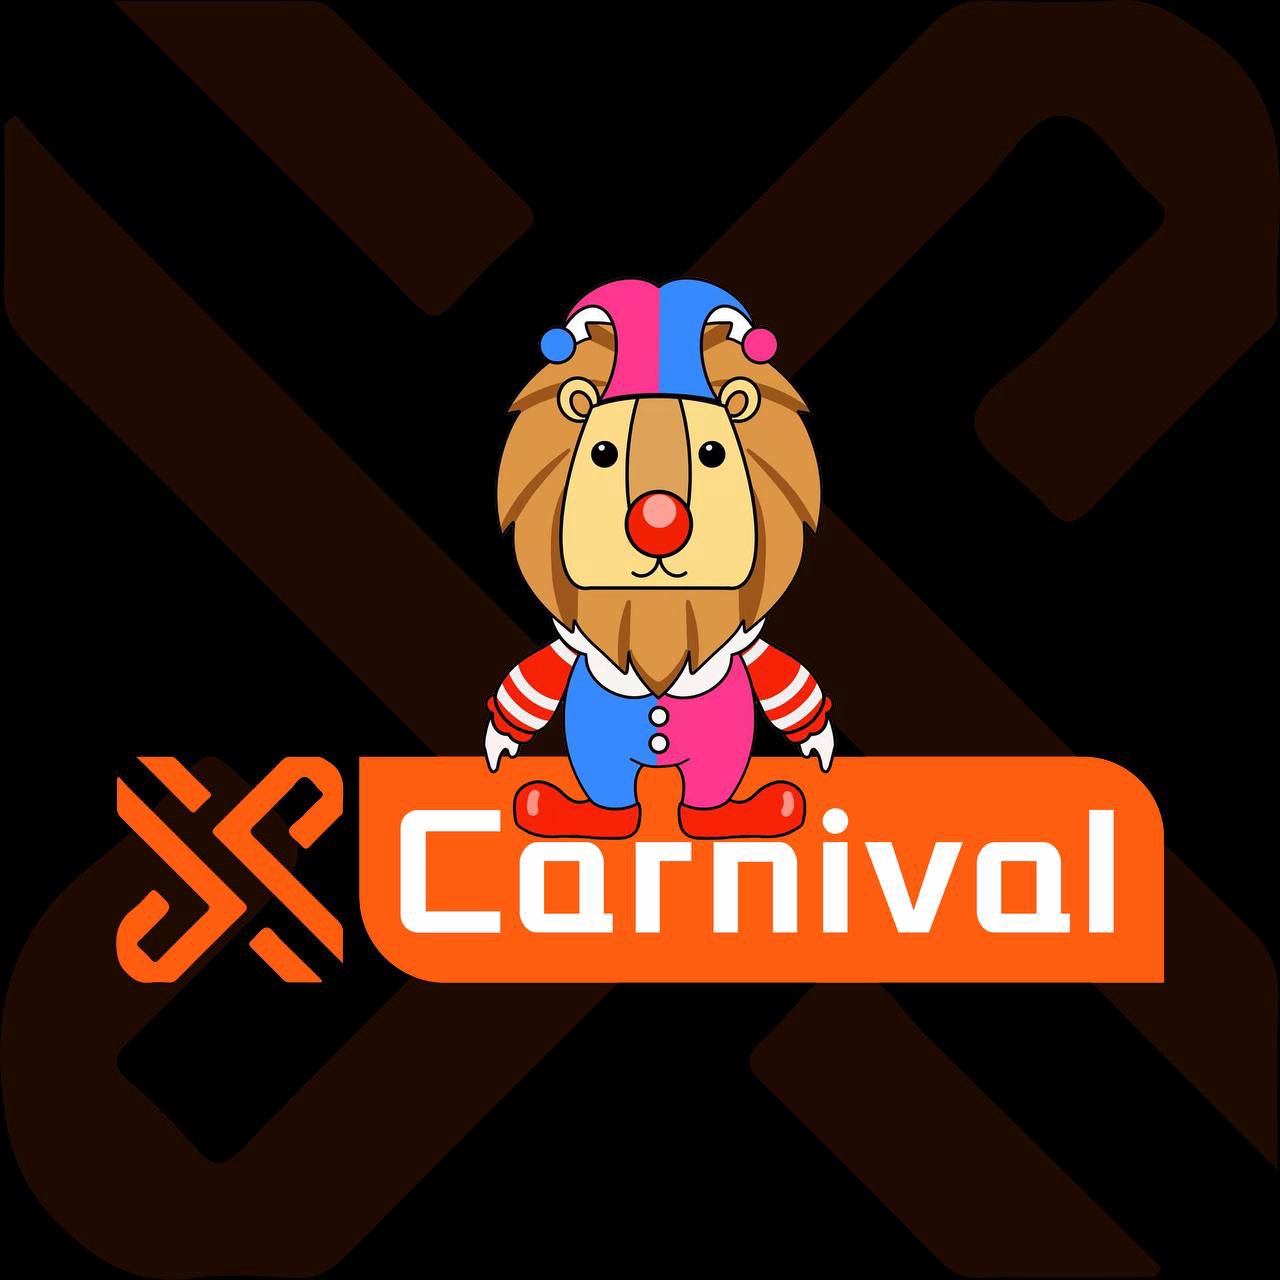 Hacker "repents"return half of the stolen money to XCarnival in less than 24 hours of attack